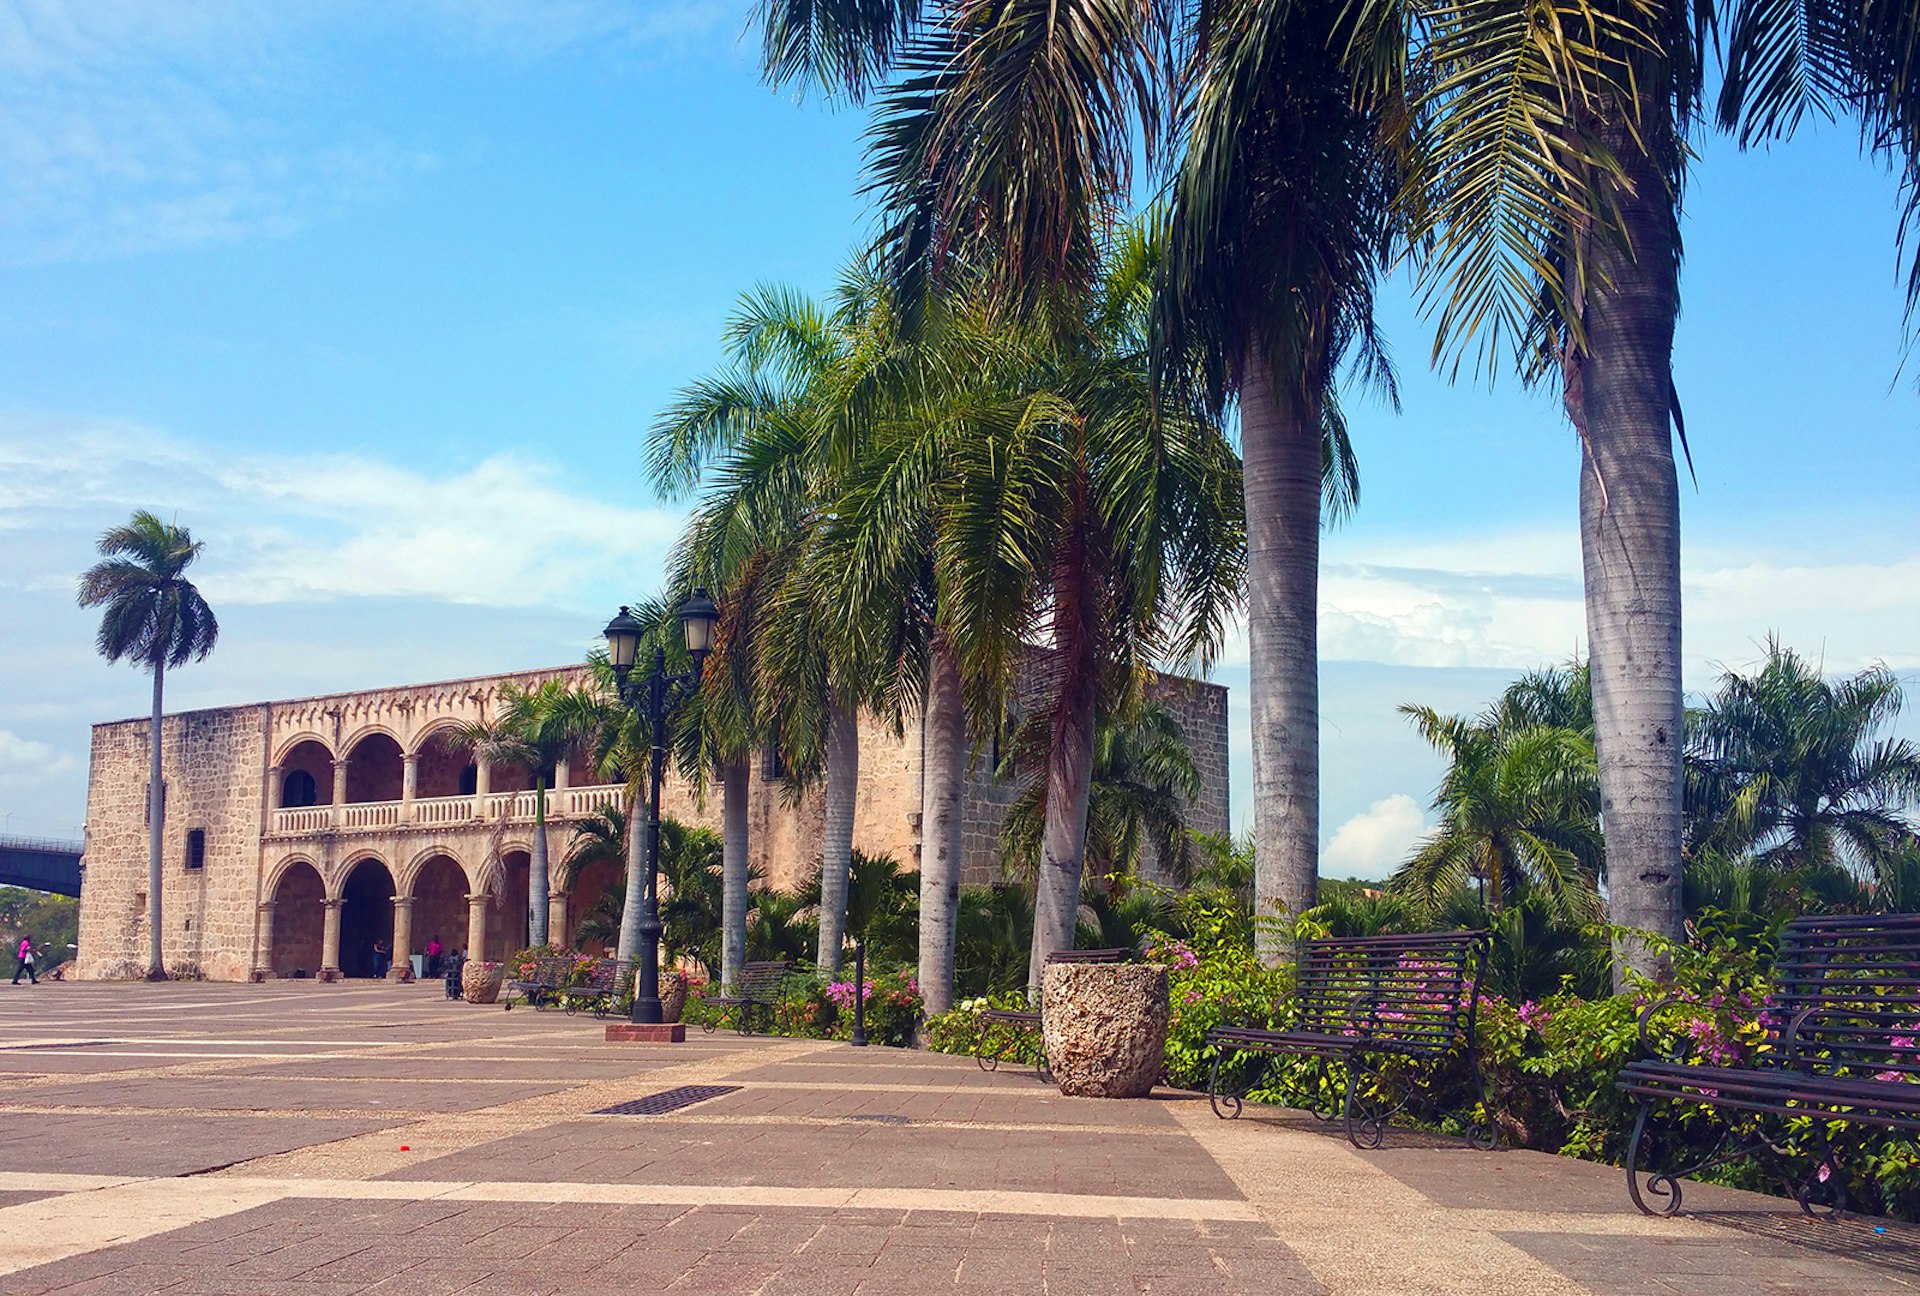 A row of palm trees stand next to the Alcázar de Colón, the residence of Christopher Columbus' son, located off of the Plaza de España. The Dominican Republic has more to offer than beaches. 